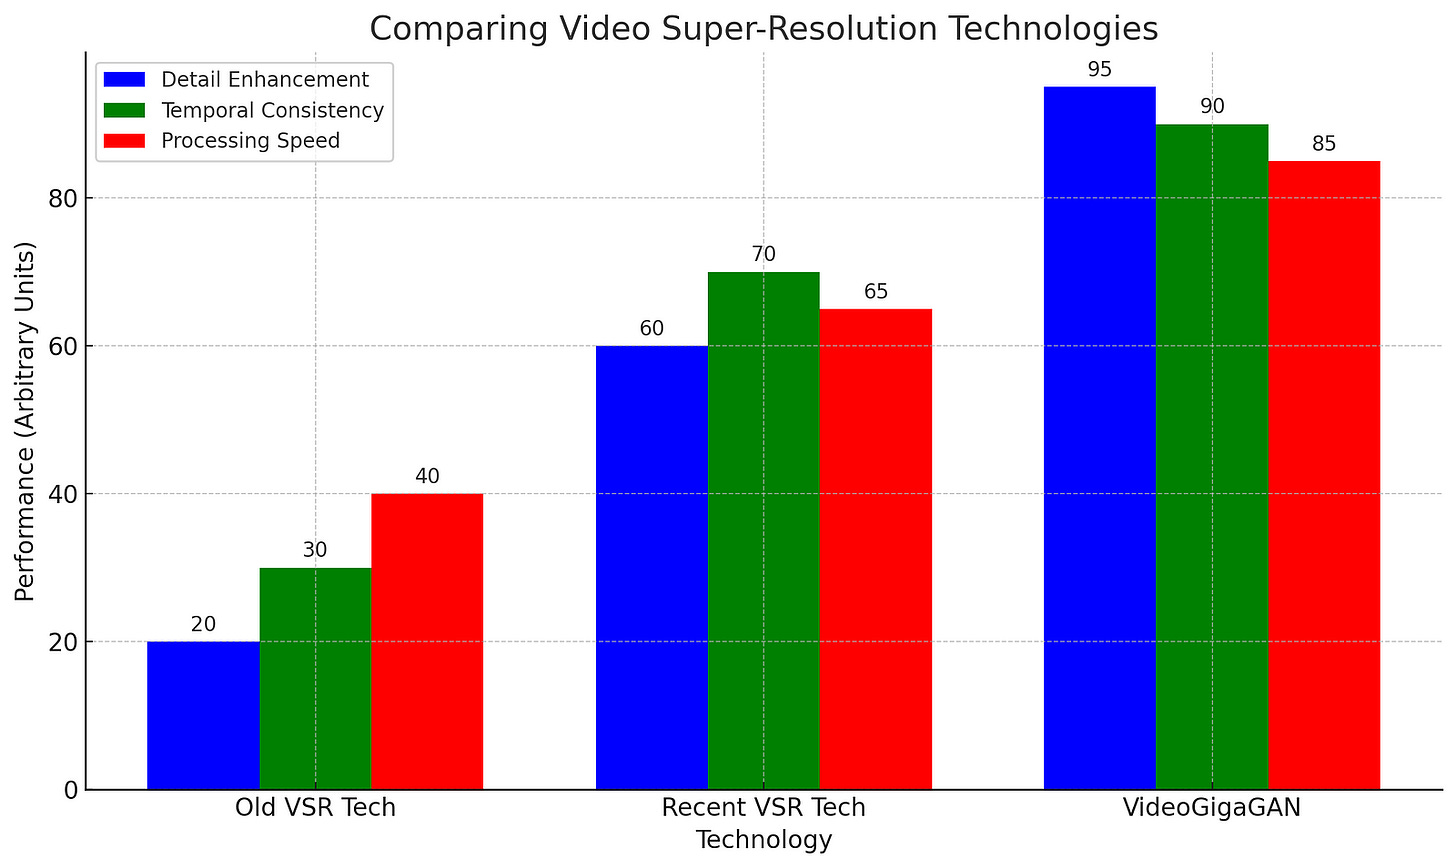 Bar graph comparing old, recent, and VideoGigaGAN super-resolution technologies across three parameters: detail enhancement, temporal consistency, and processing speed. VideoGigaGAN shows superior performance in all categories, depicted in blue, green, and red bars respectively.